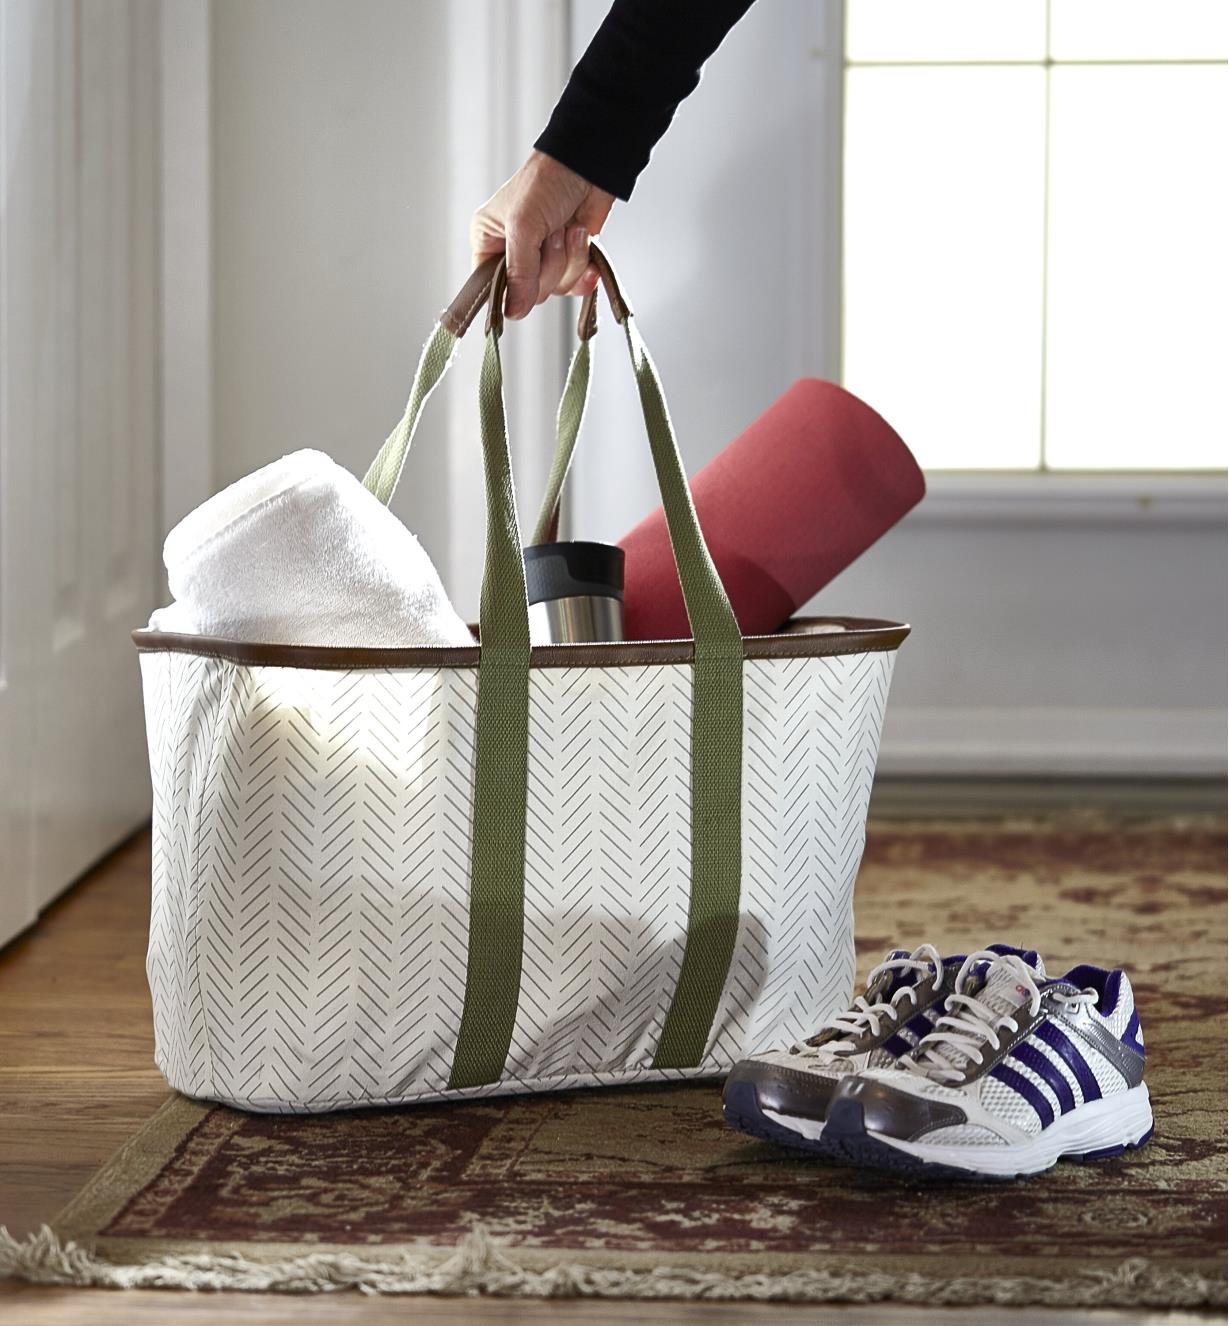 A person picks up a foldaway tote holding a yoga mat, towel and travel mug before leaving the house